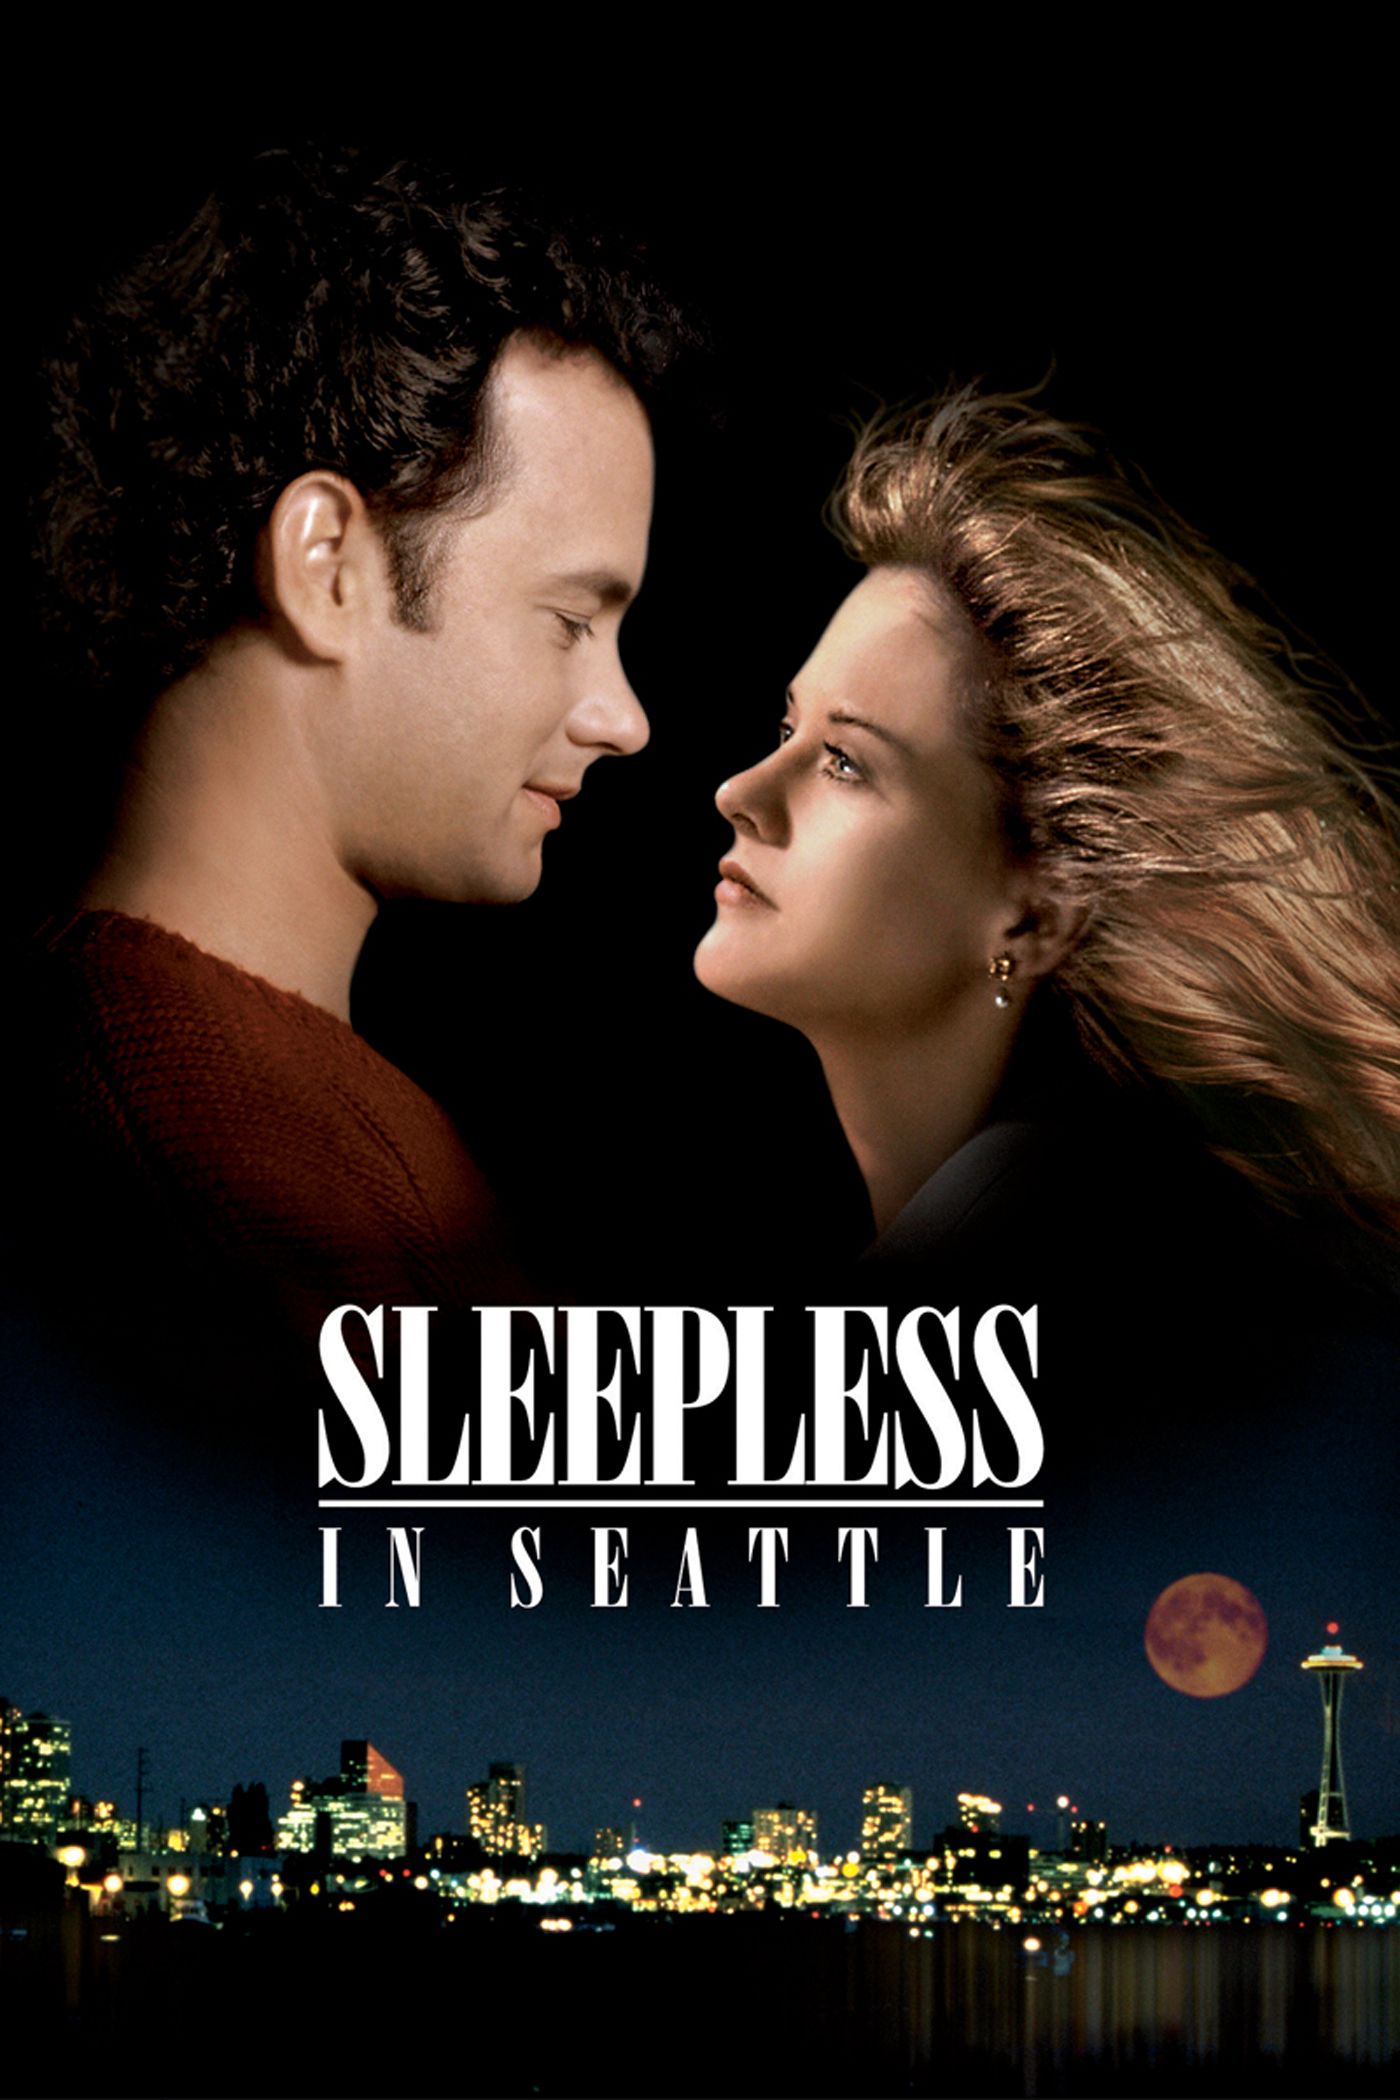 Movie of sex in Seattle